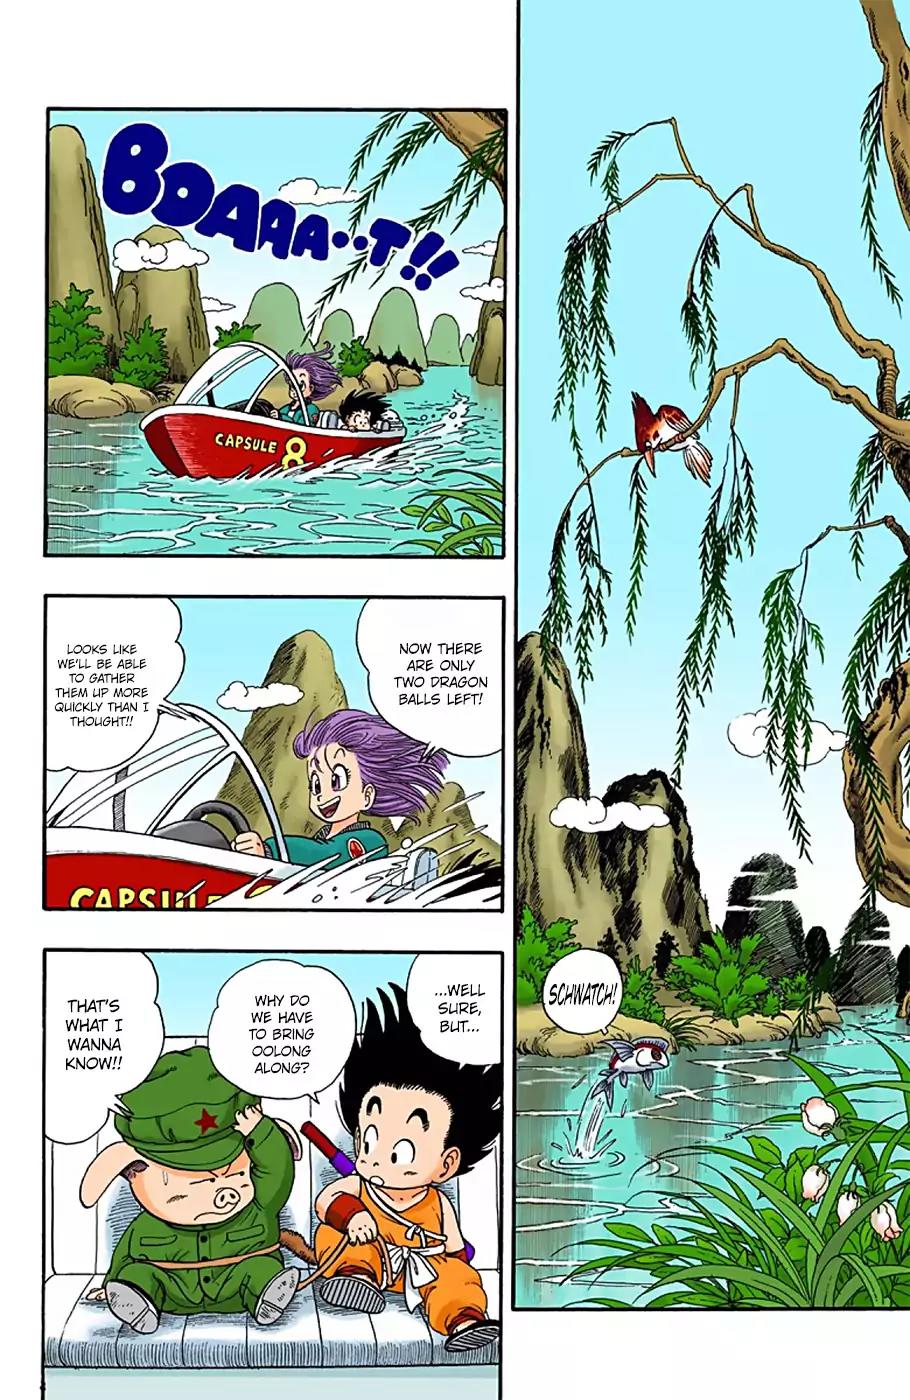 Dragon Ball - Full Color Vol.1 Chapter 6: